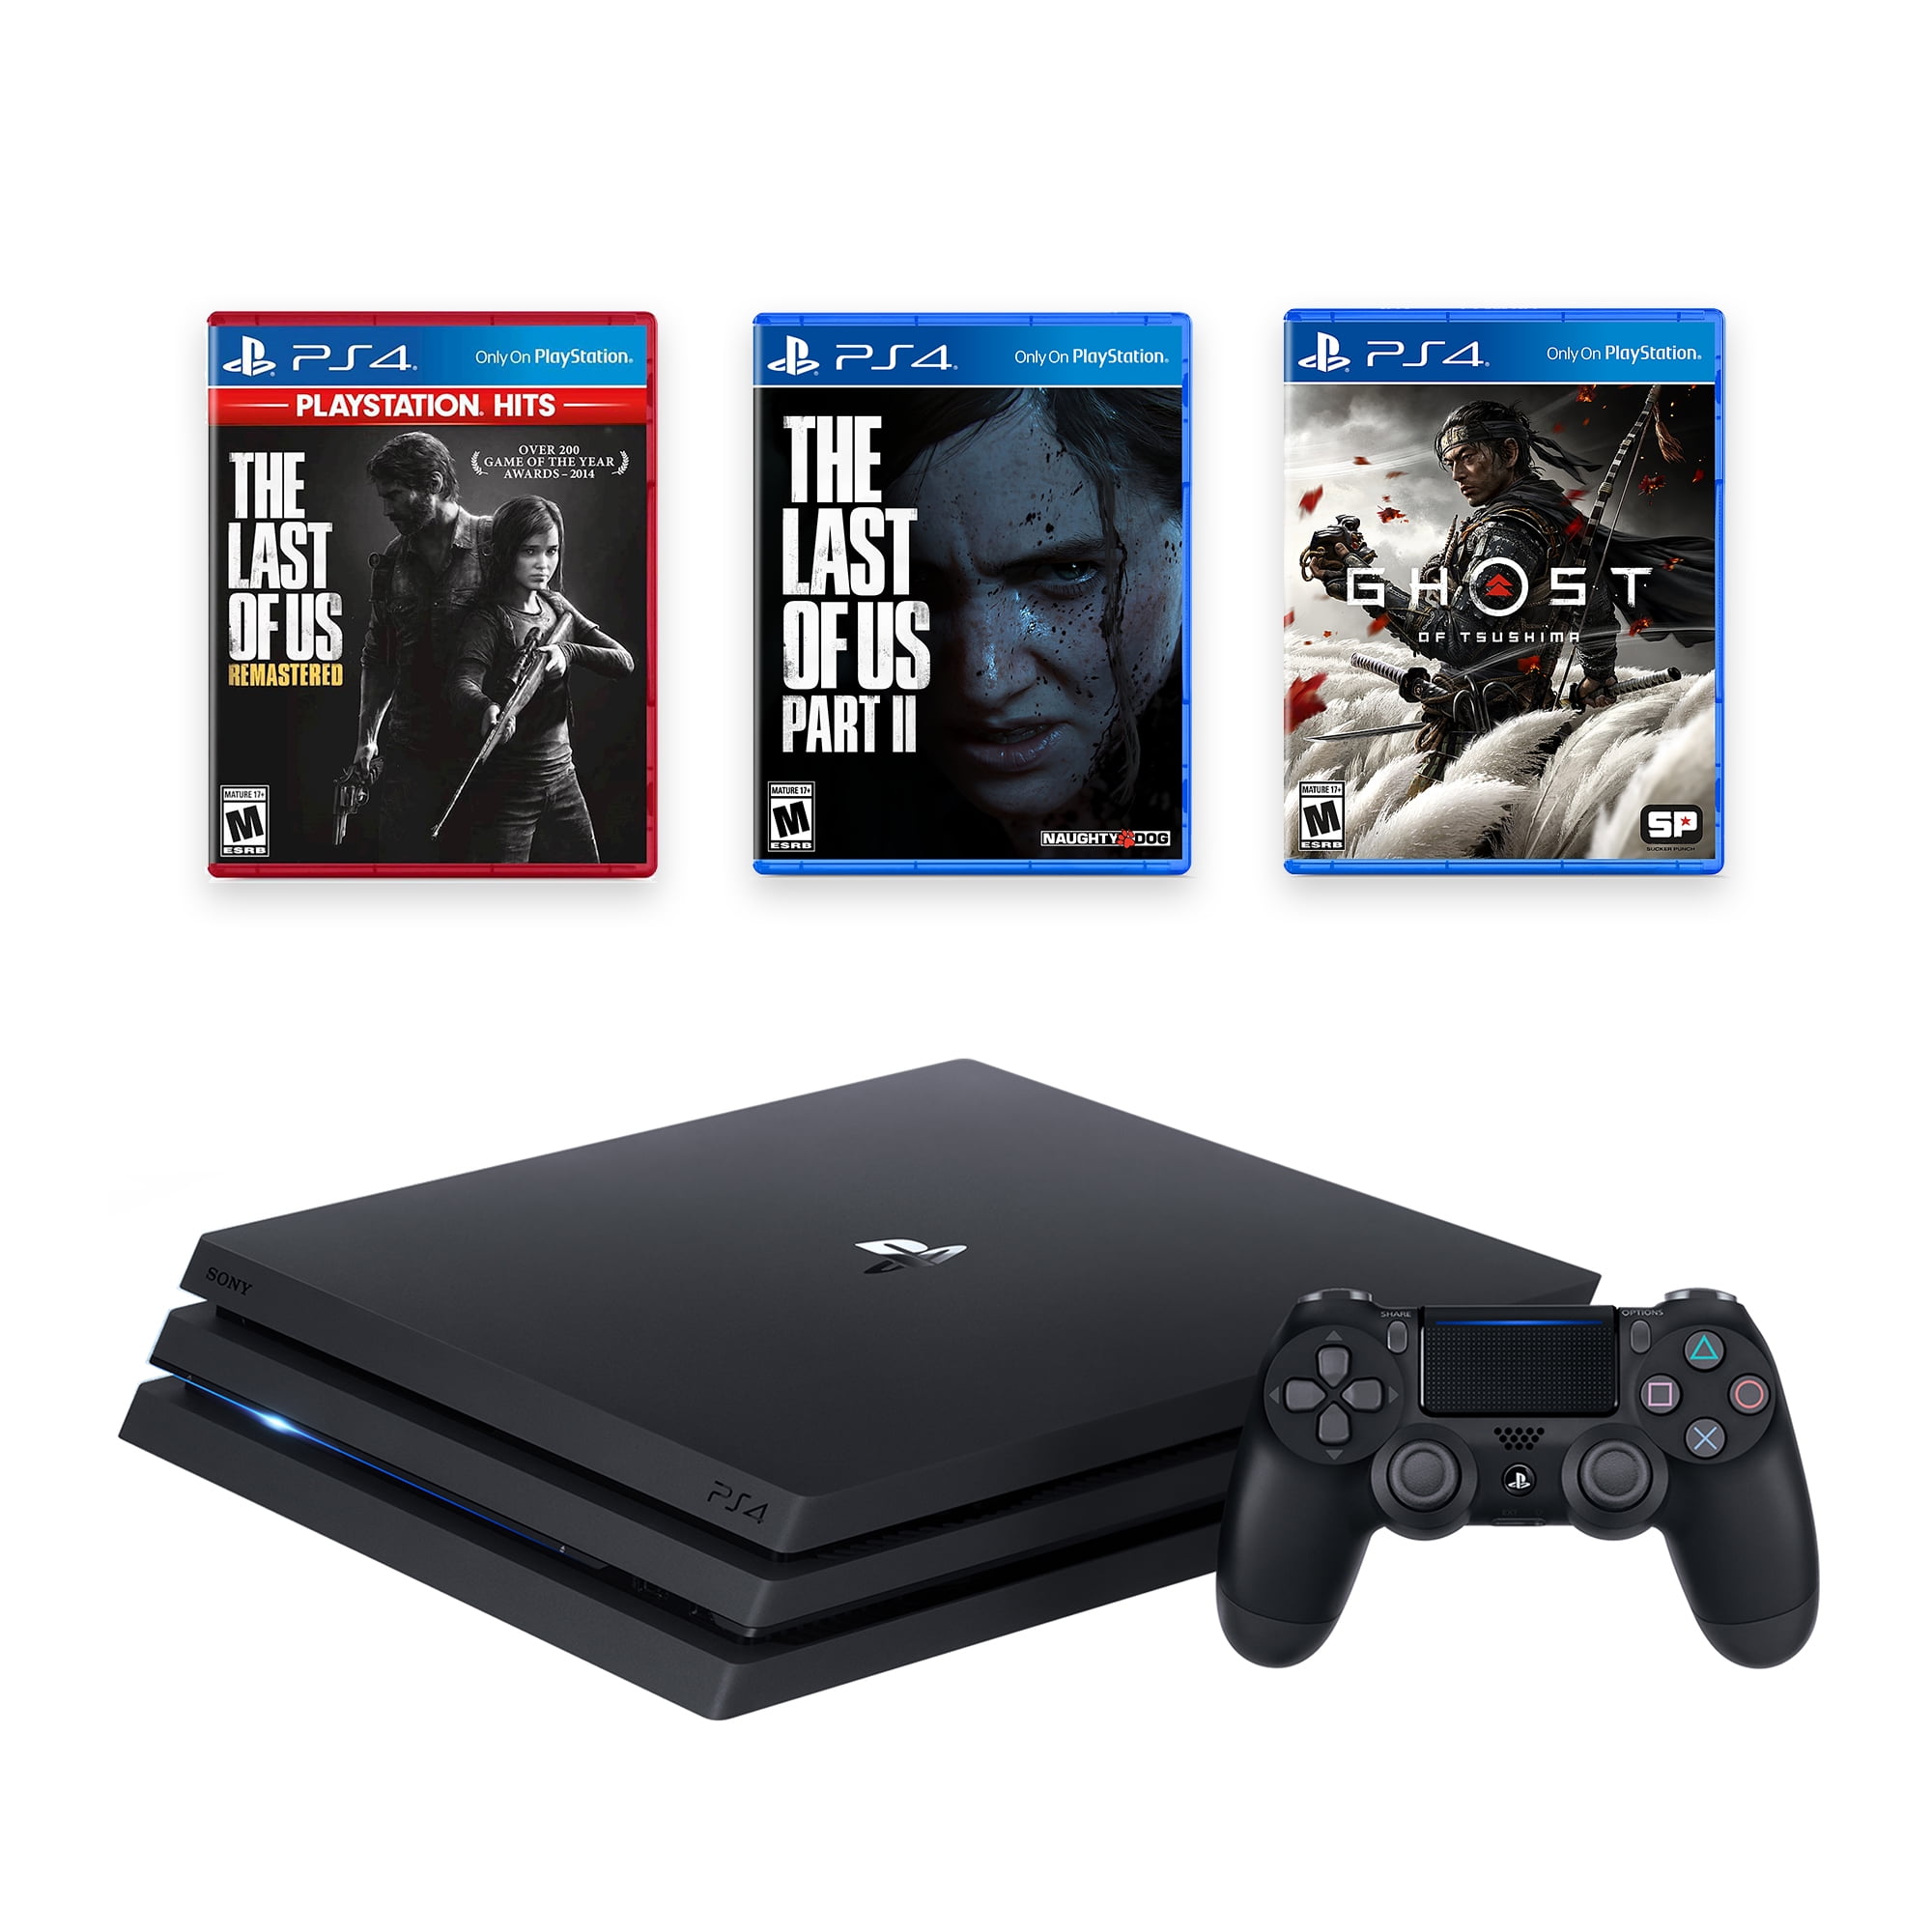 Playstation 4 Pro 1tb Console With The Last Of Us And Ghost Of Tsushima Ps4 Pro 1tb Jet Black 4k Hdr Gaming Console Wireless Controller And Games Walmart Com Walmart Com - top best horror game on roblox electronic deal pro